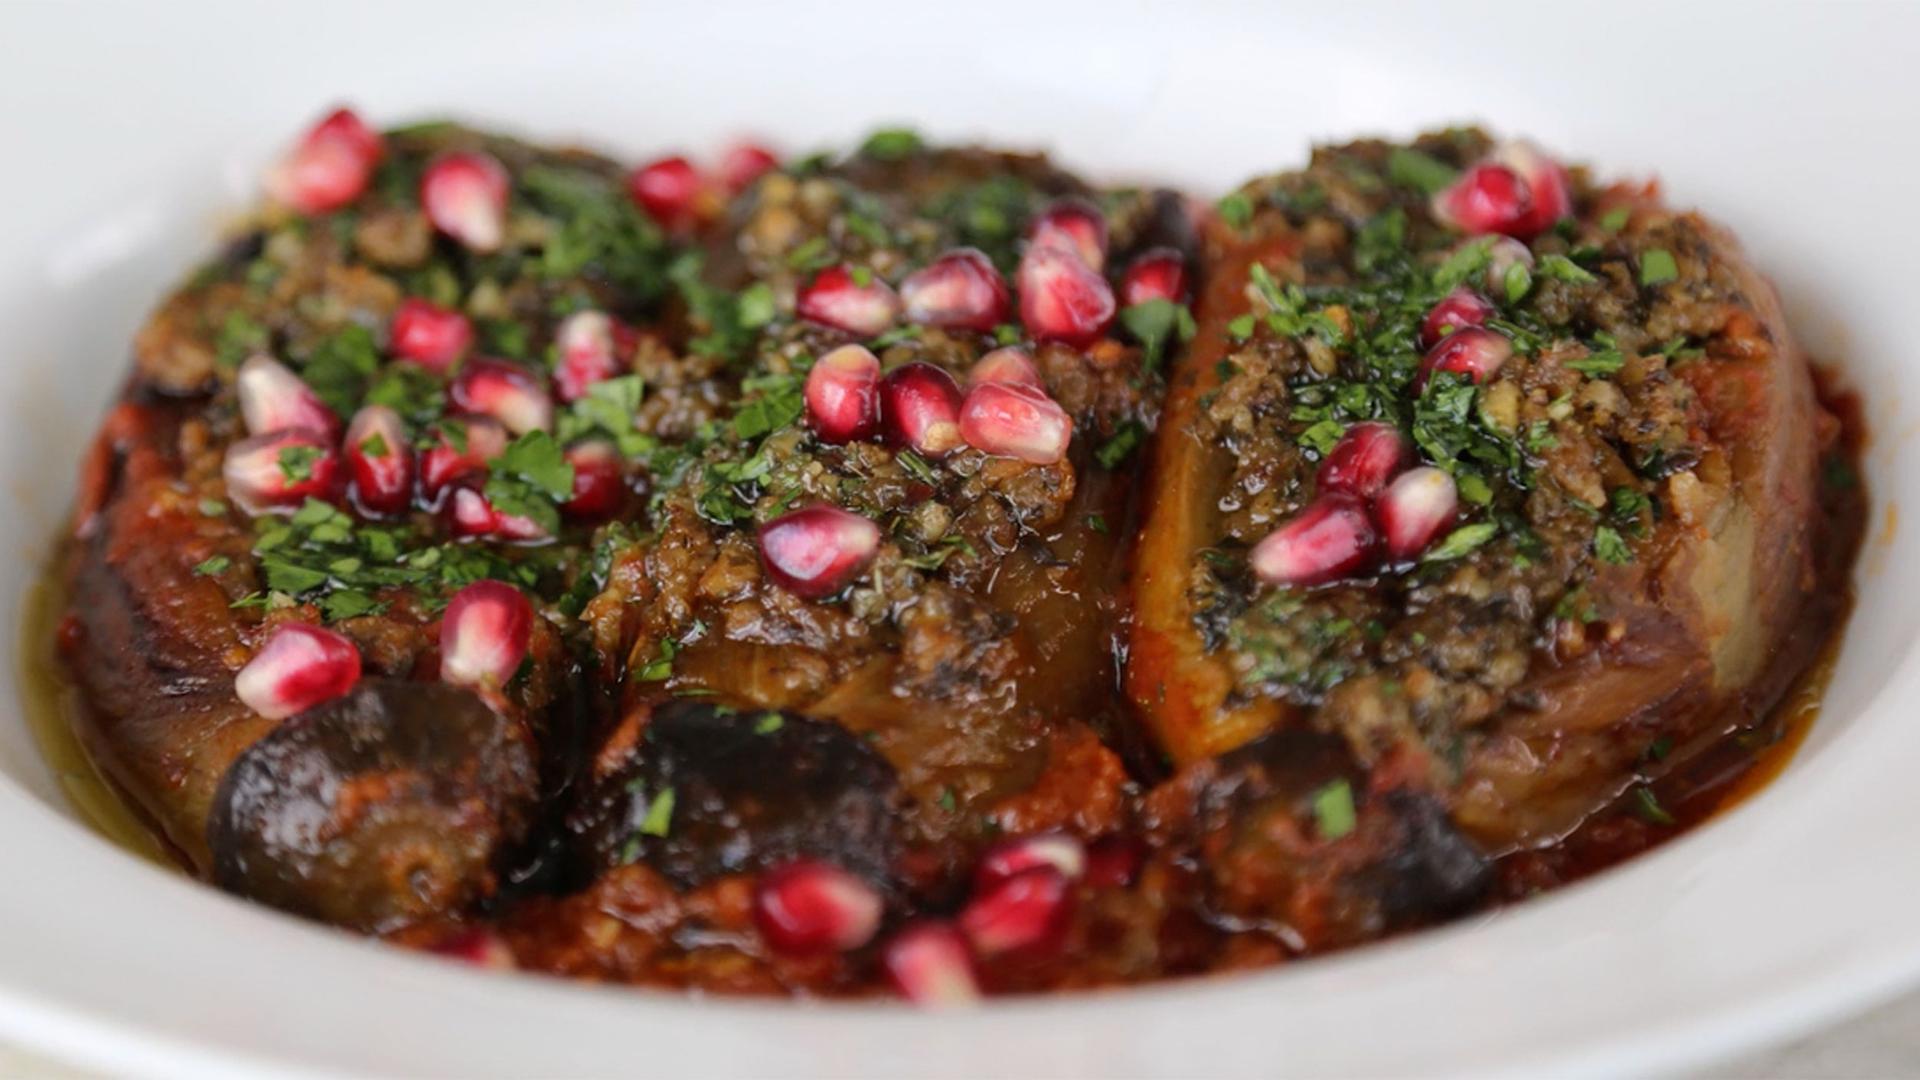 A 9th-century recipe from a 10th-century cookbook from Baghdad, updated for the modern diner by renowned chef, cookbook author and restaurateur Najmieh Batmanglij.